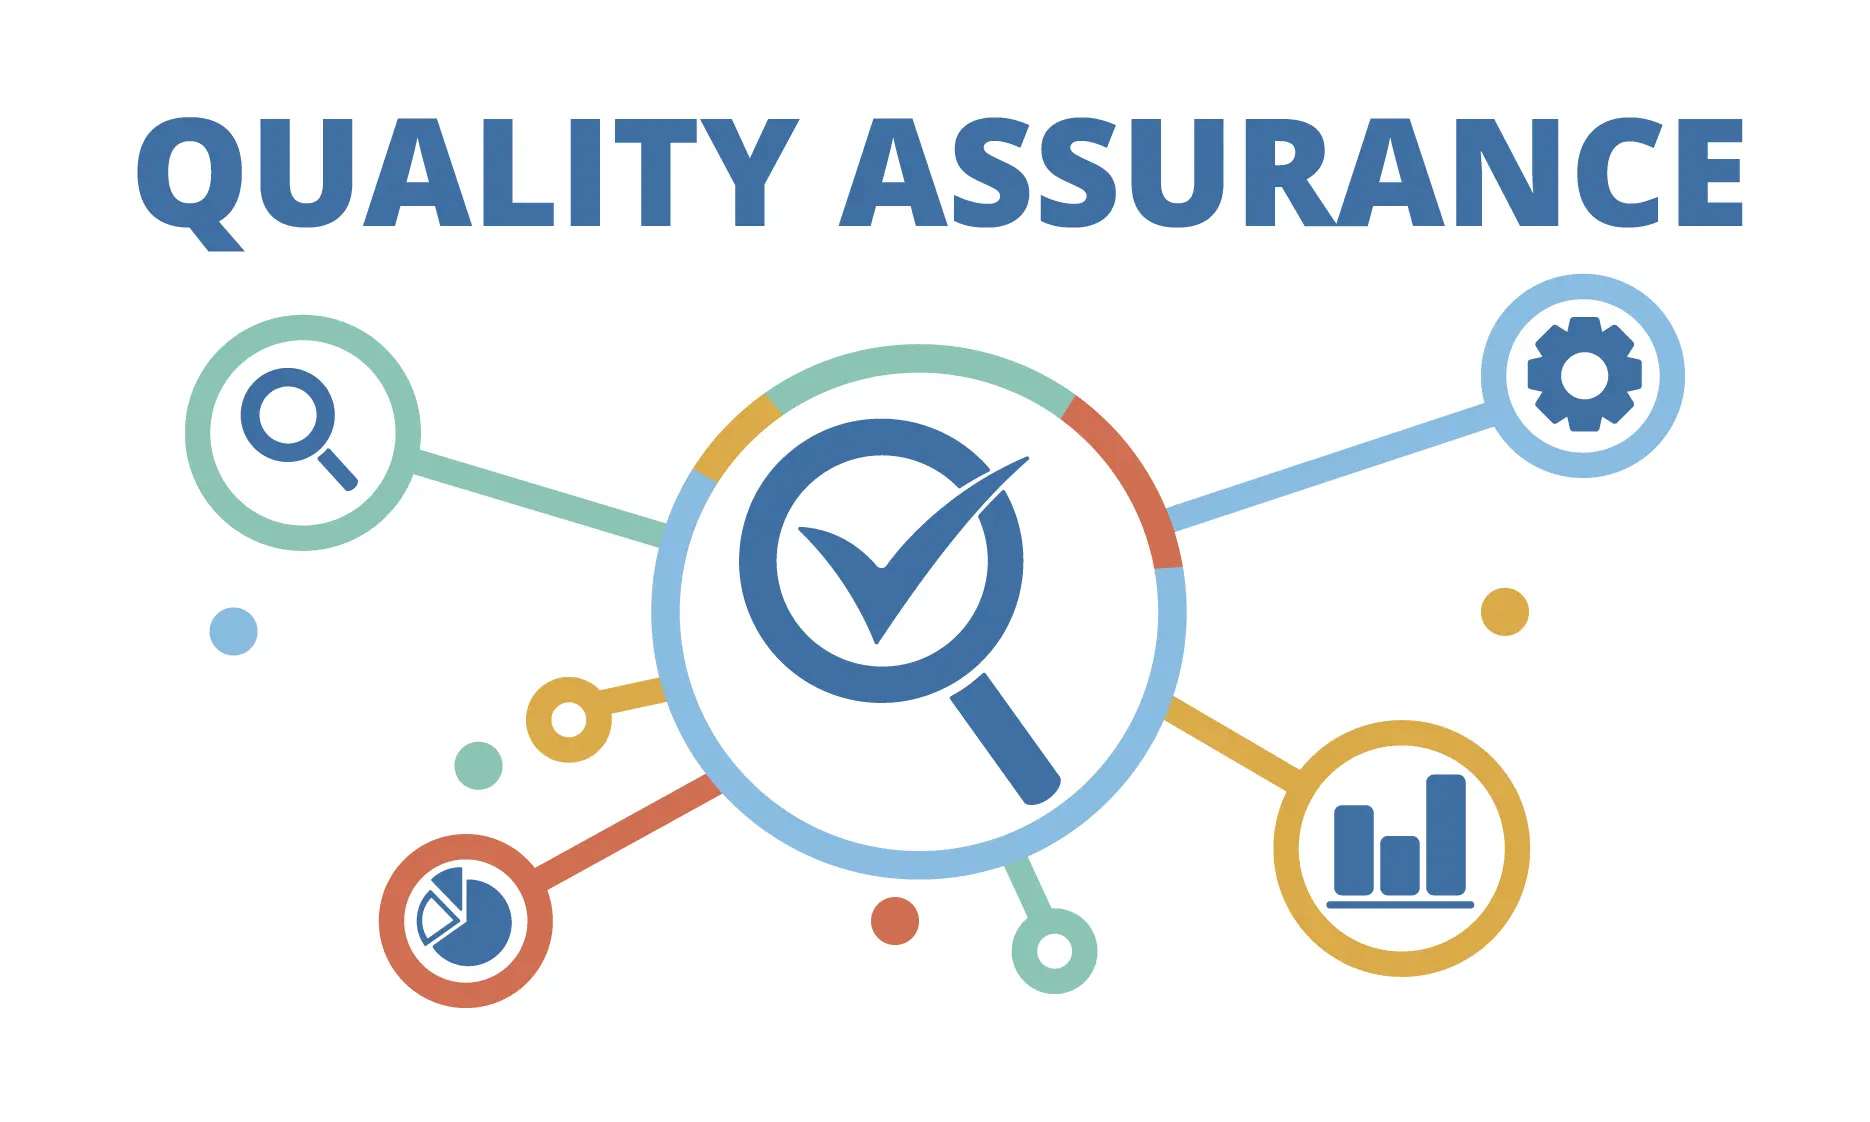 Testing and Quality Assurance